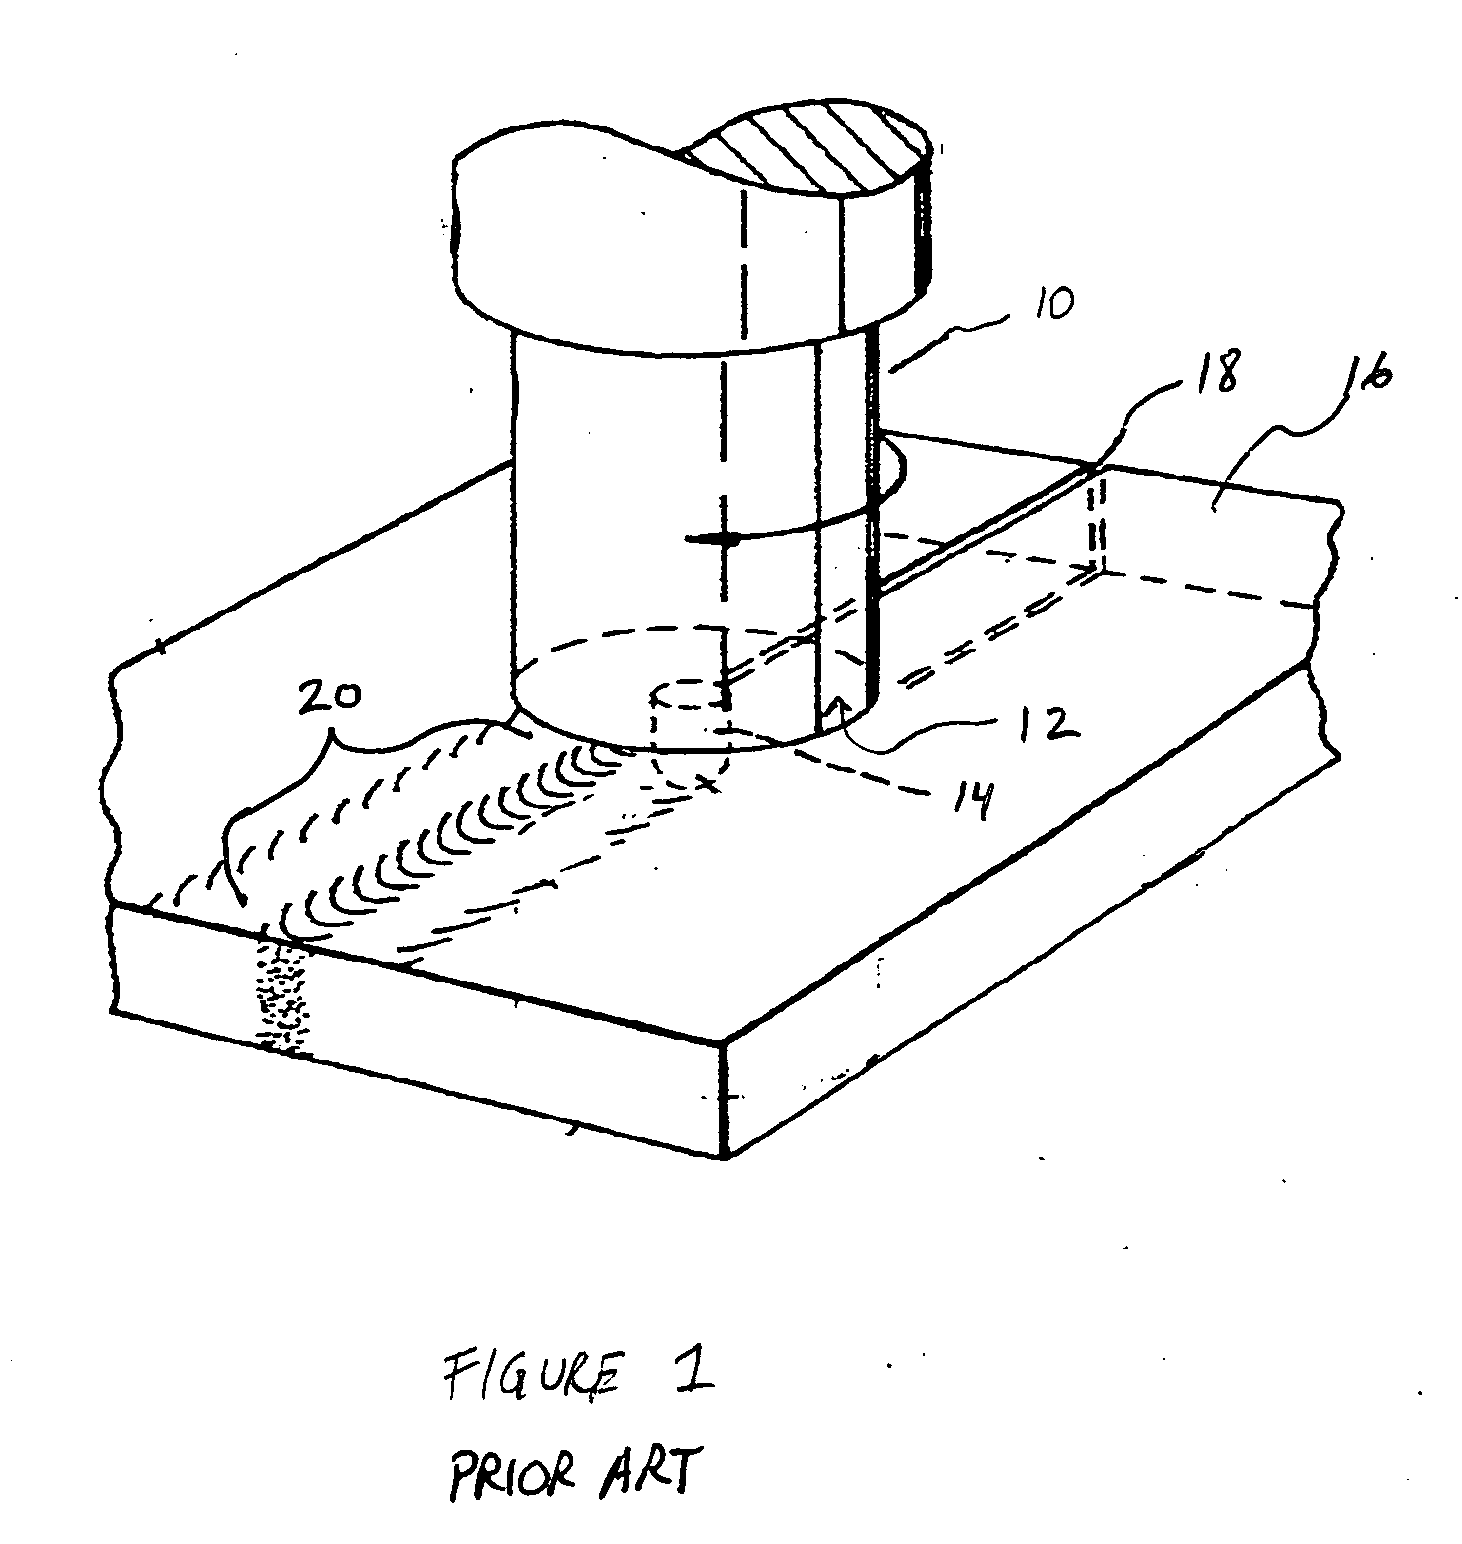 Expandable mandrel for use in friction stir welding